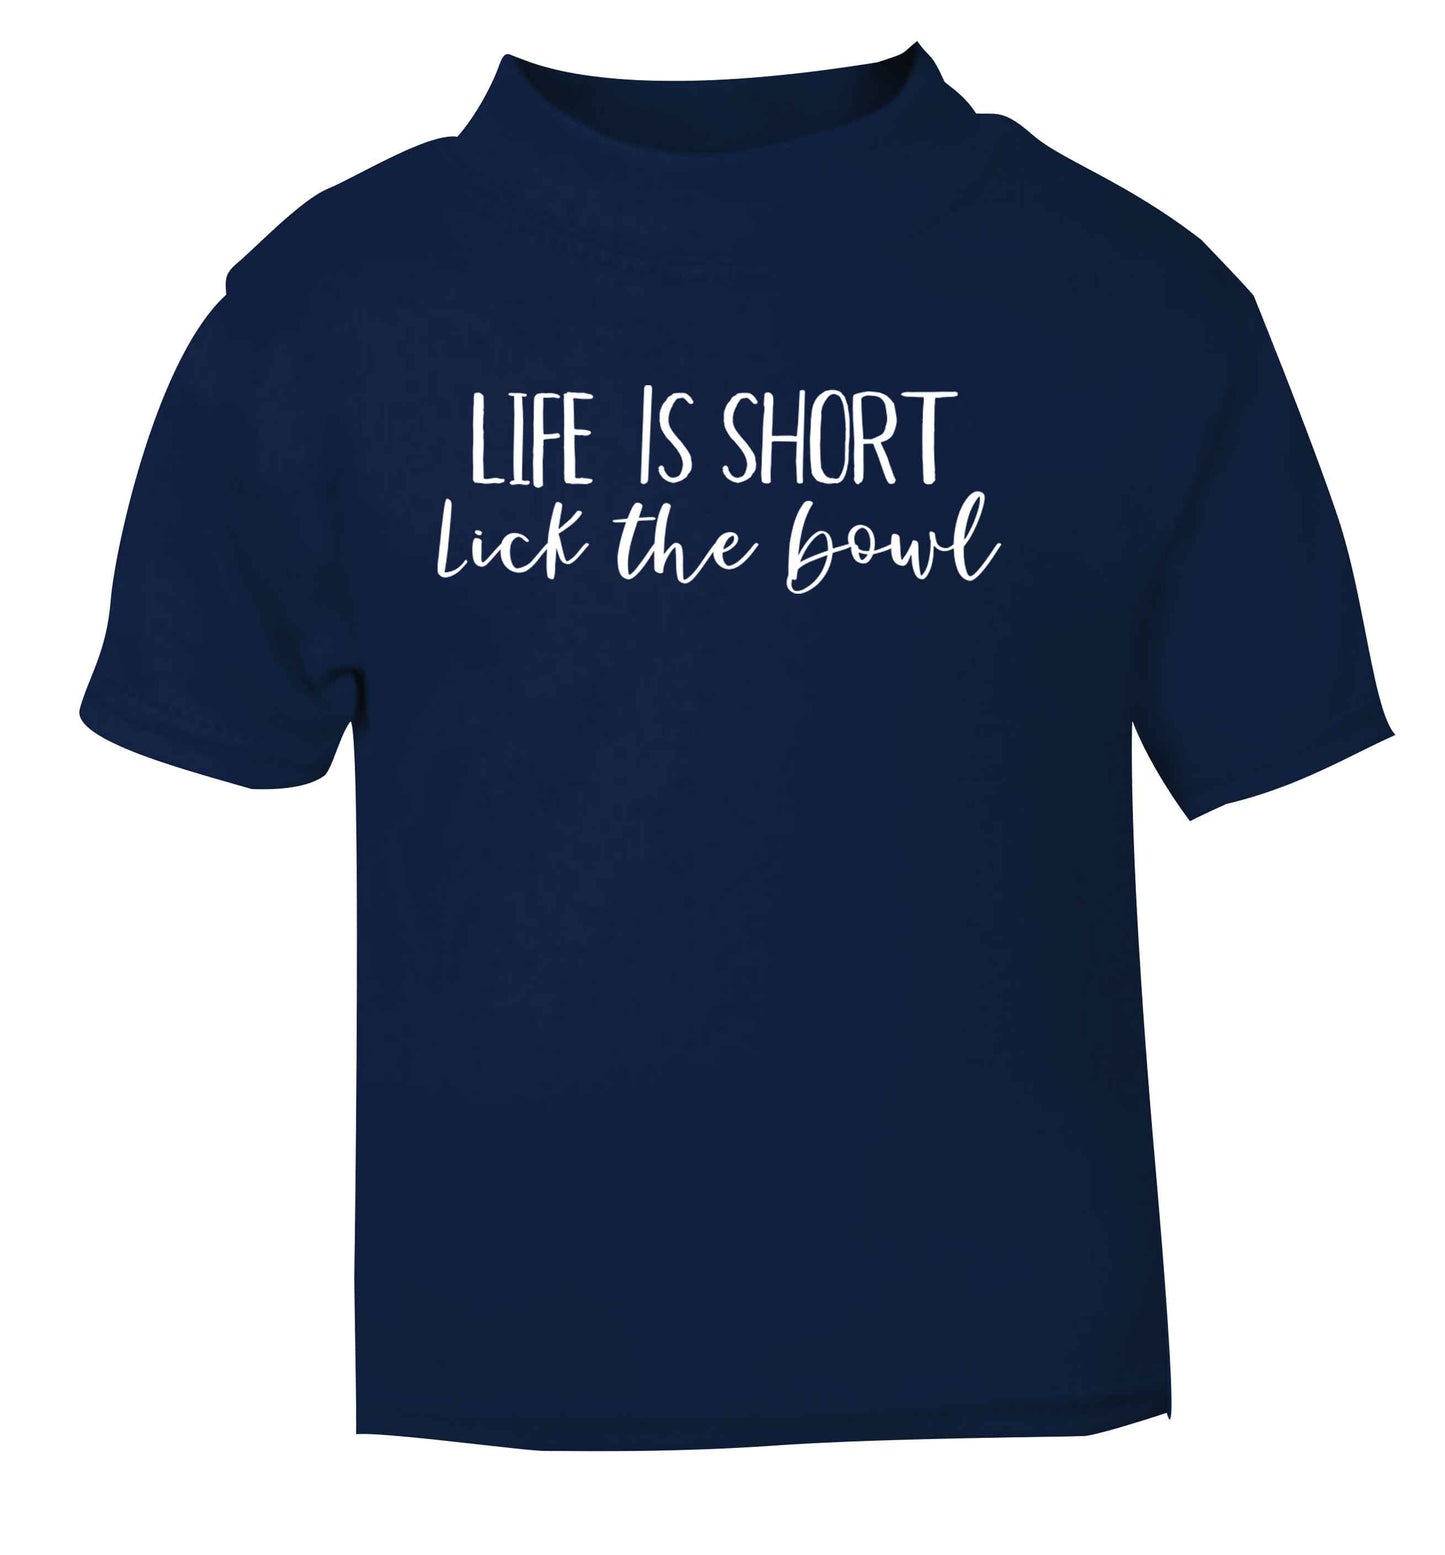 Life is short lick the bowl navy Baby Toddler Tshirt 2 Years